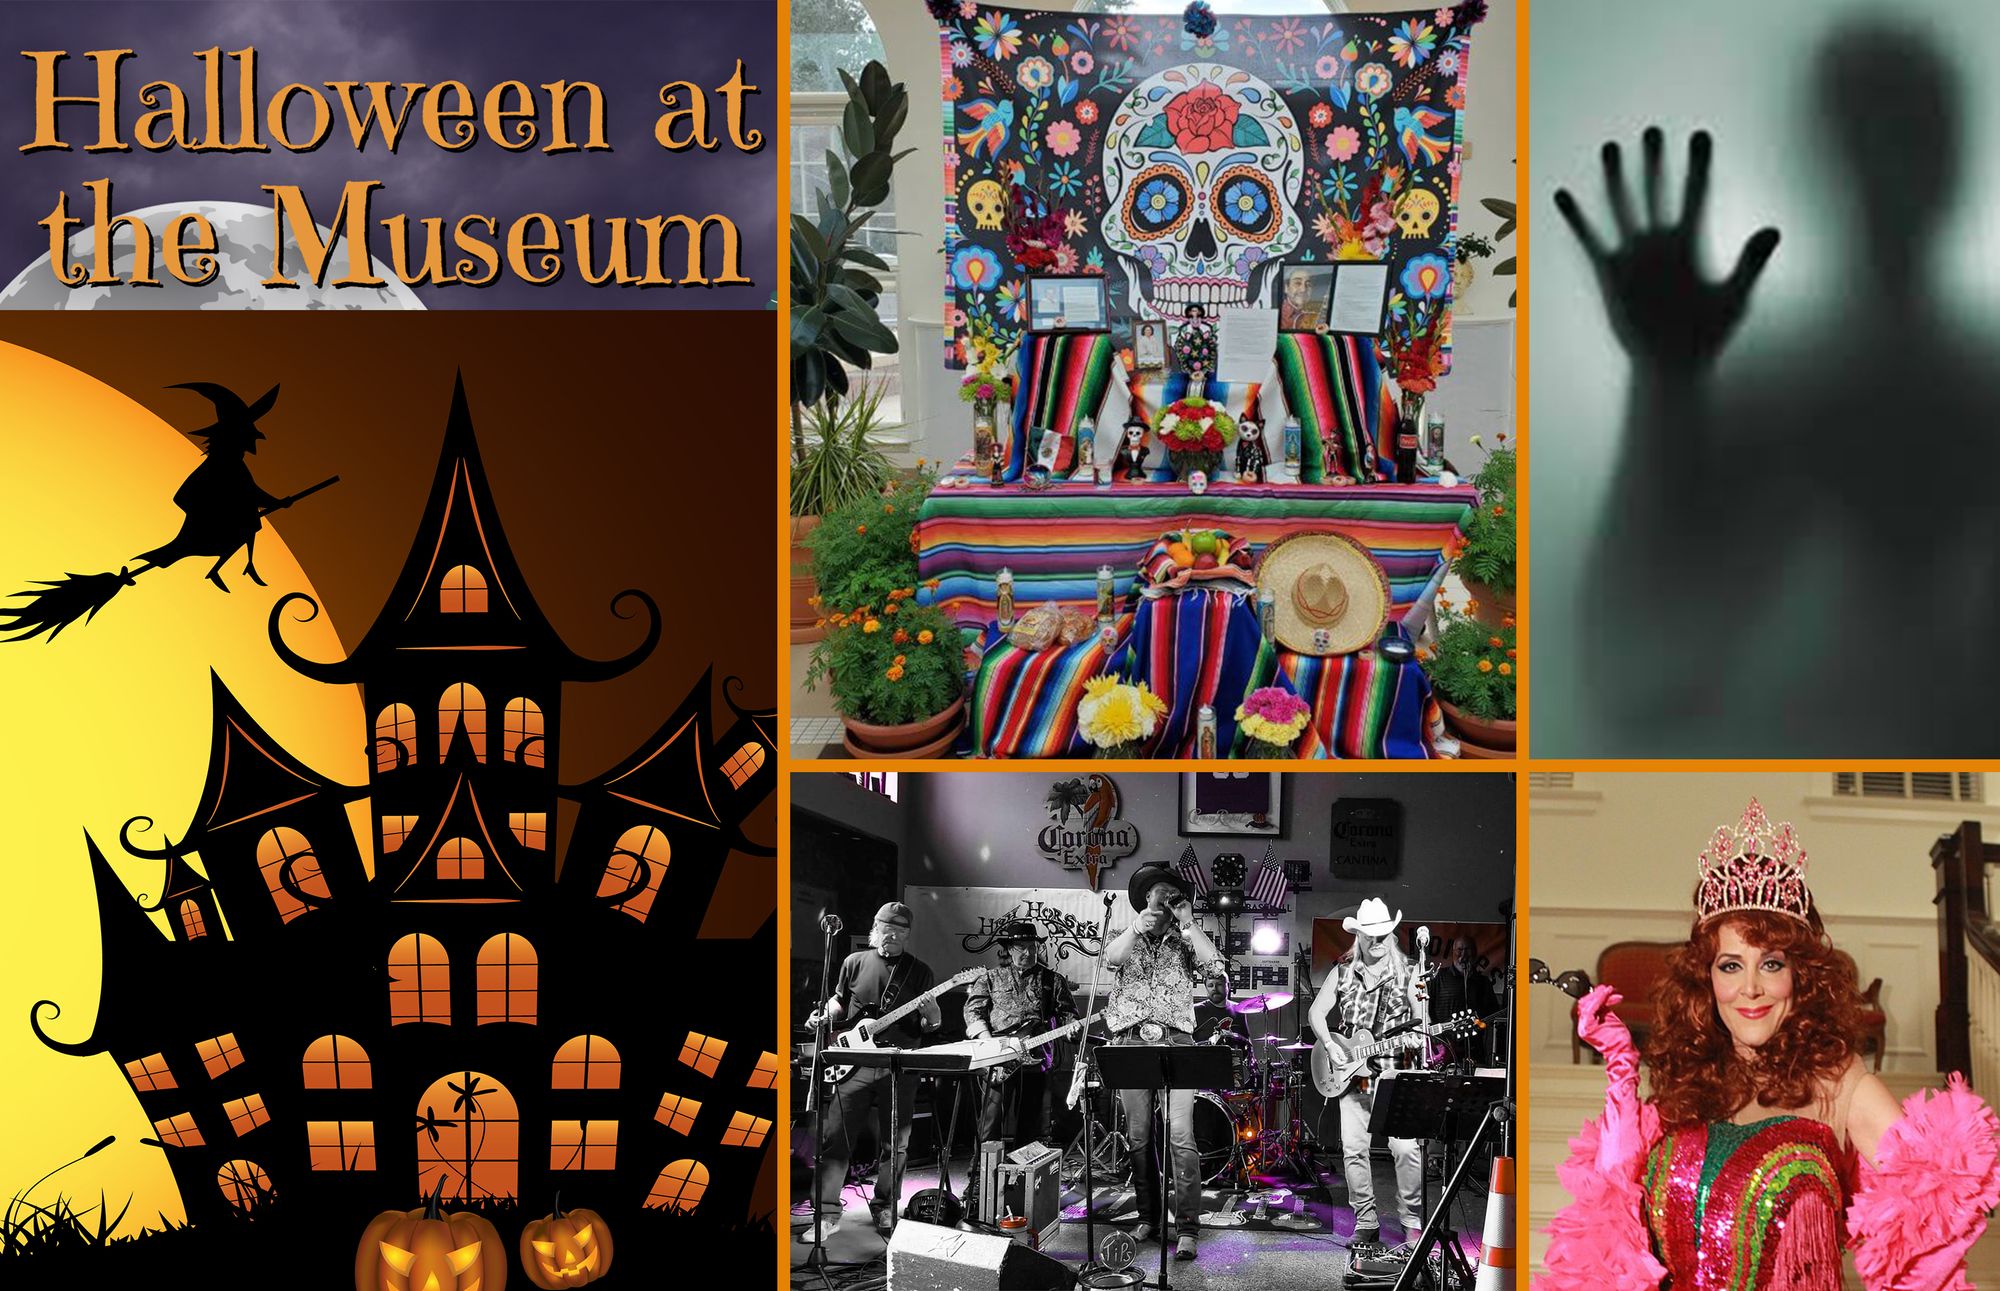 Halloween Fun Abounds This Weekend - Check It Out!